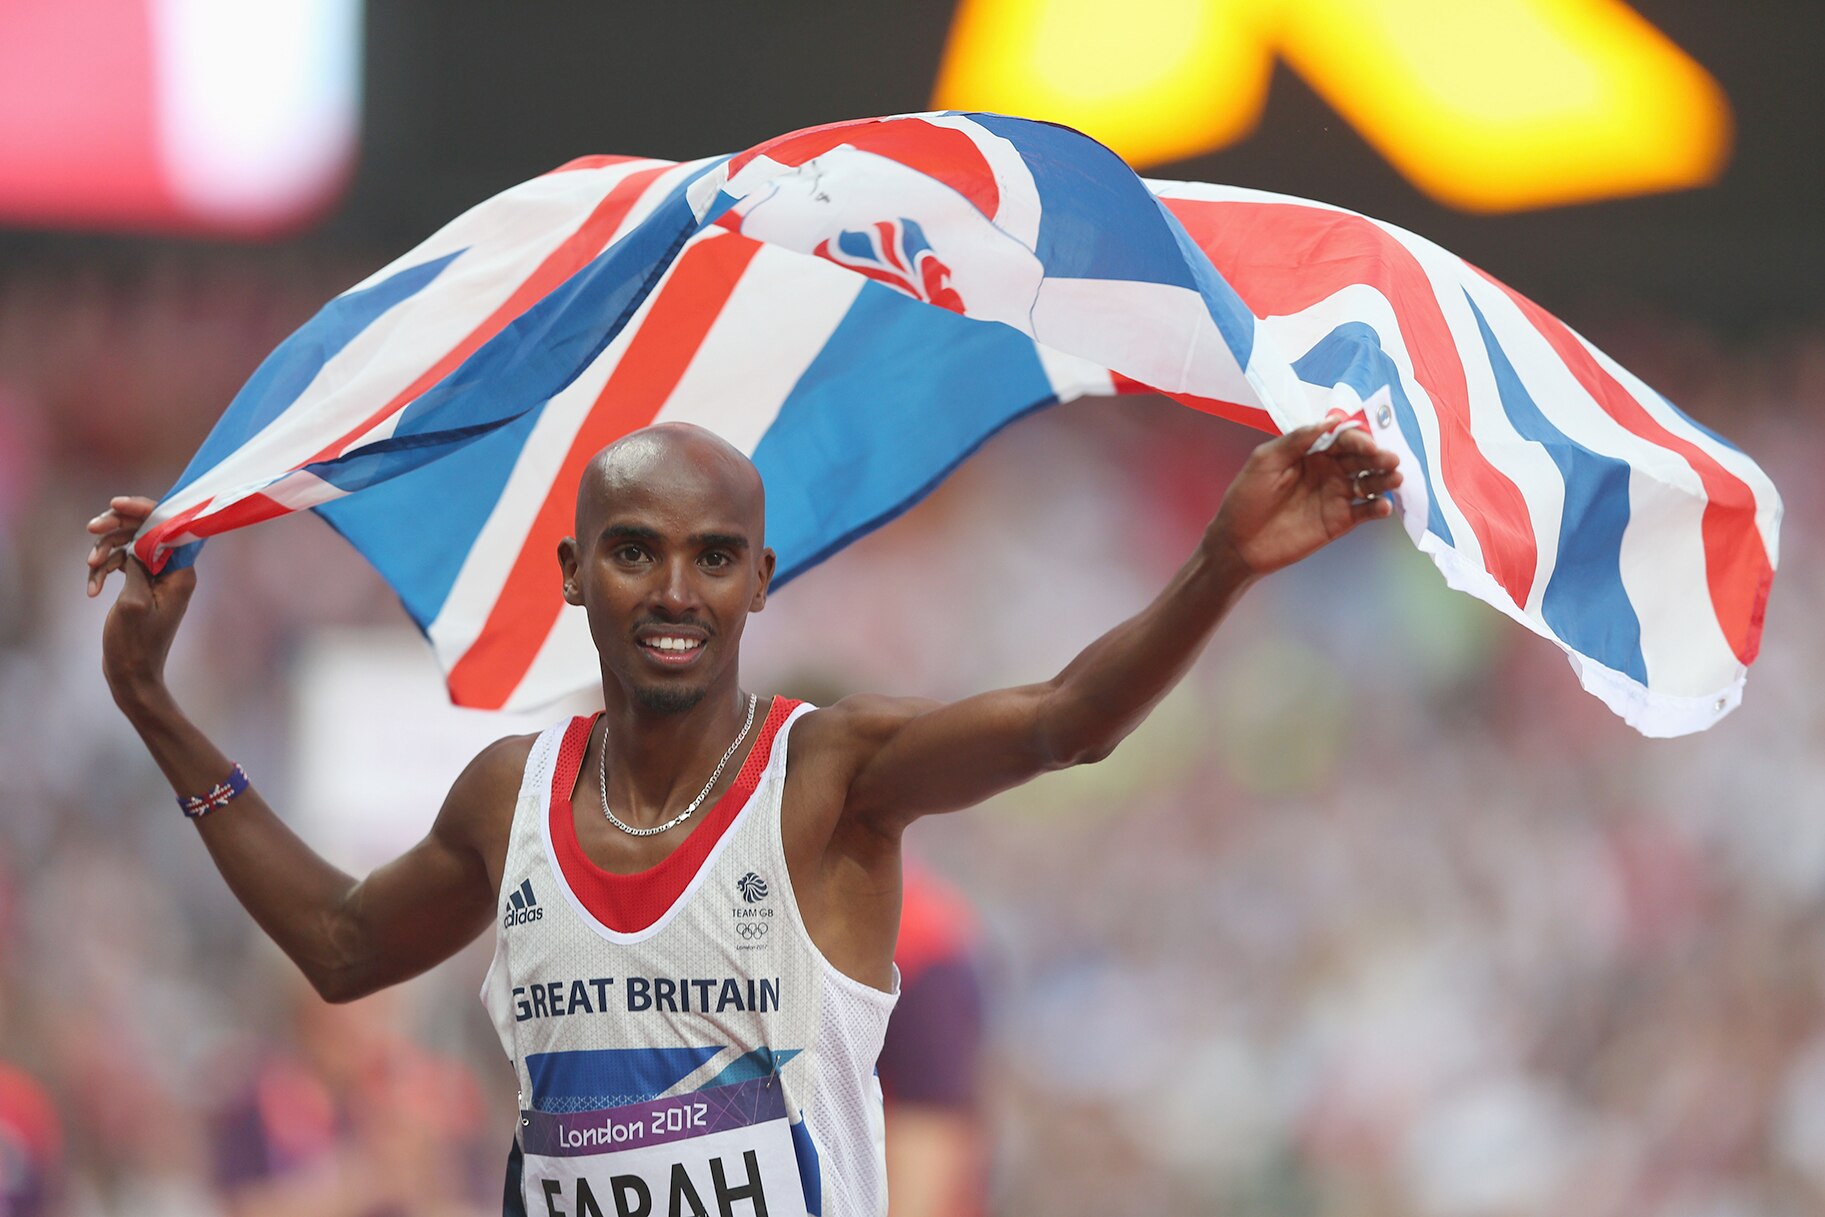 Mohamed Farah of Great Britain holds a union jack aloft as he celebrates winning gold